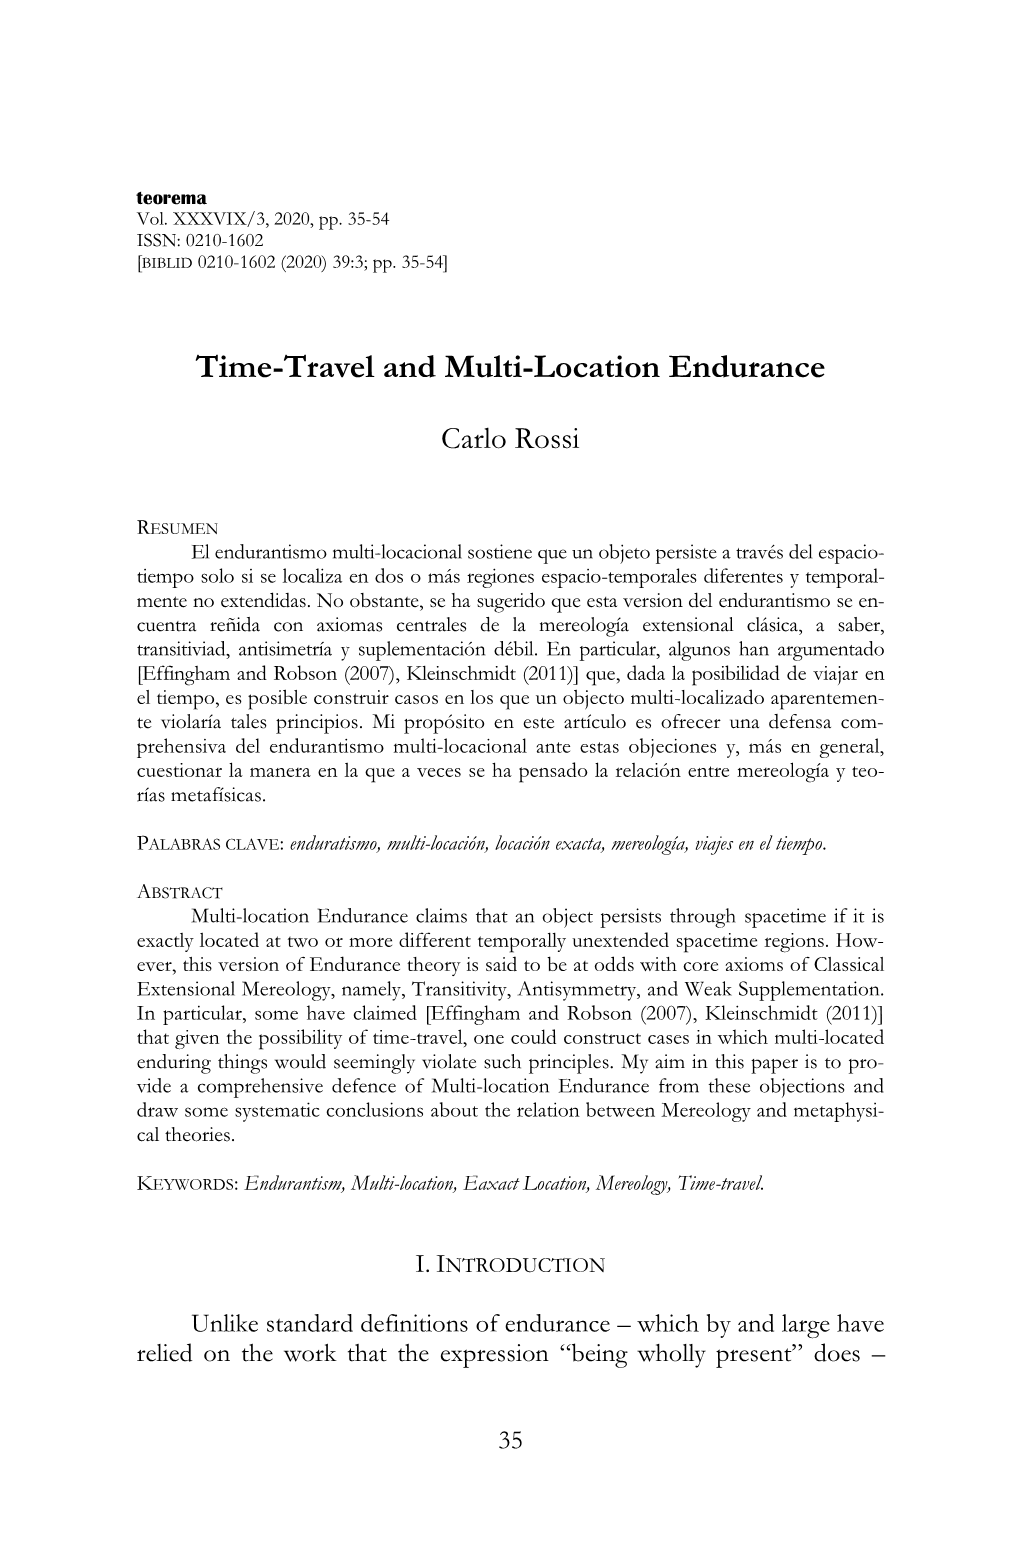 Time-Travel and Multi-Location Endurance